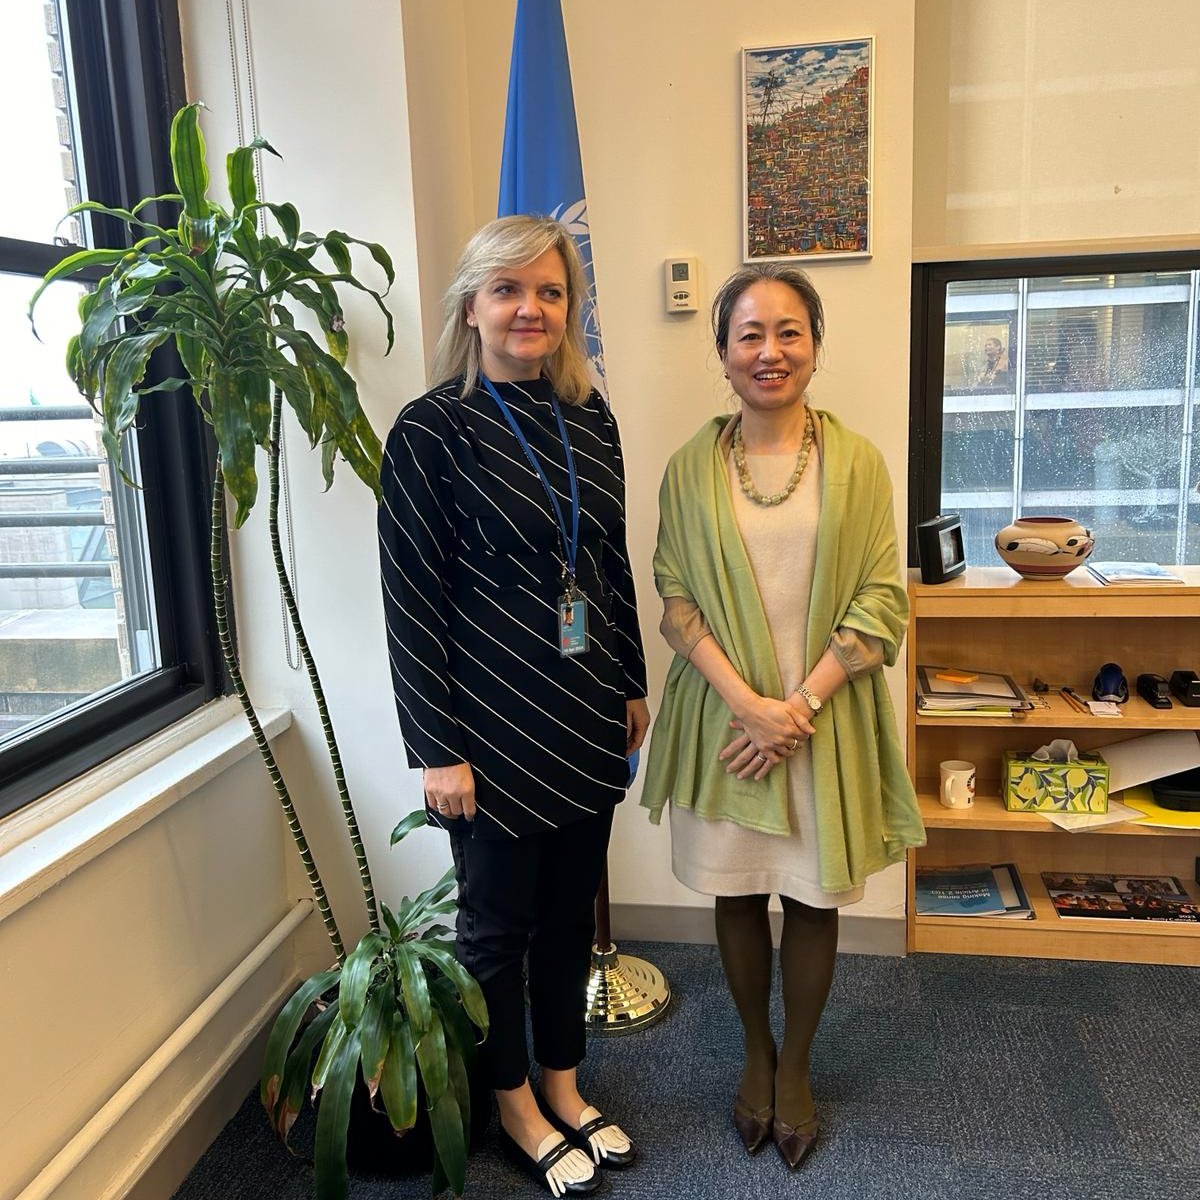 A pleasure to meet Hanna Jahns, Director Policies & Strategy @EU_ECHO. It is critical for #humanitarian, development & peace actors to work together🫱🏽‍🫲🏿 to help communities prepare for & respond to emergencies. @UNDP & @EU_Commission will continue to collaborate on the #HDPNexus.